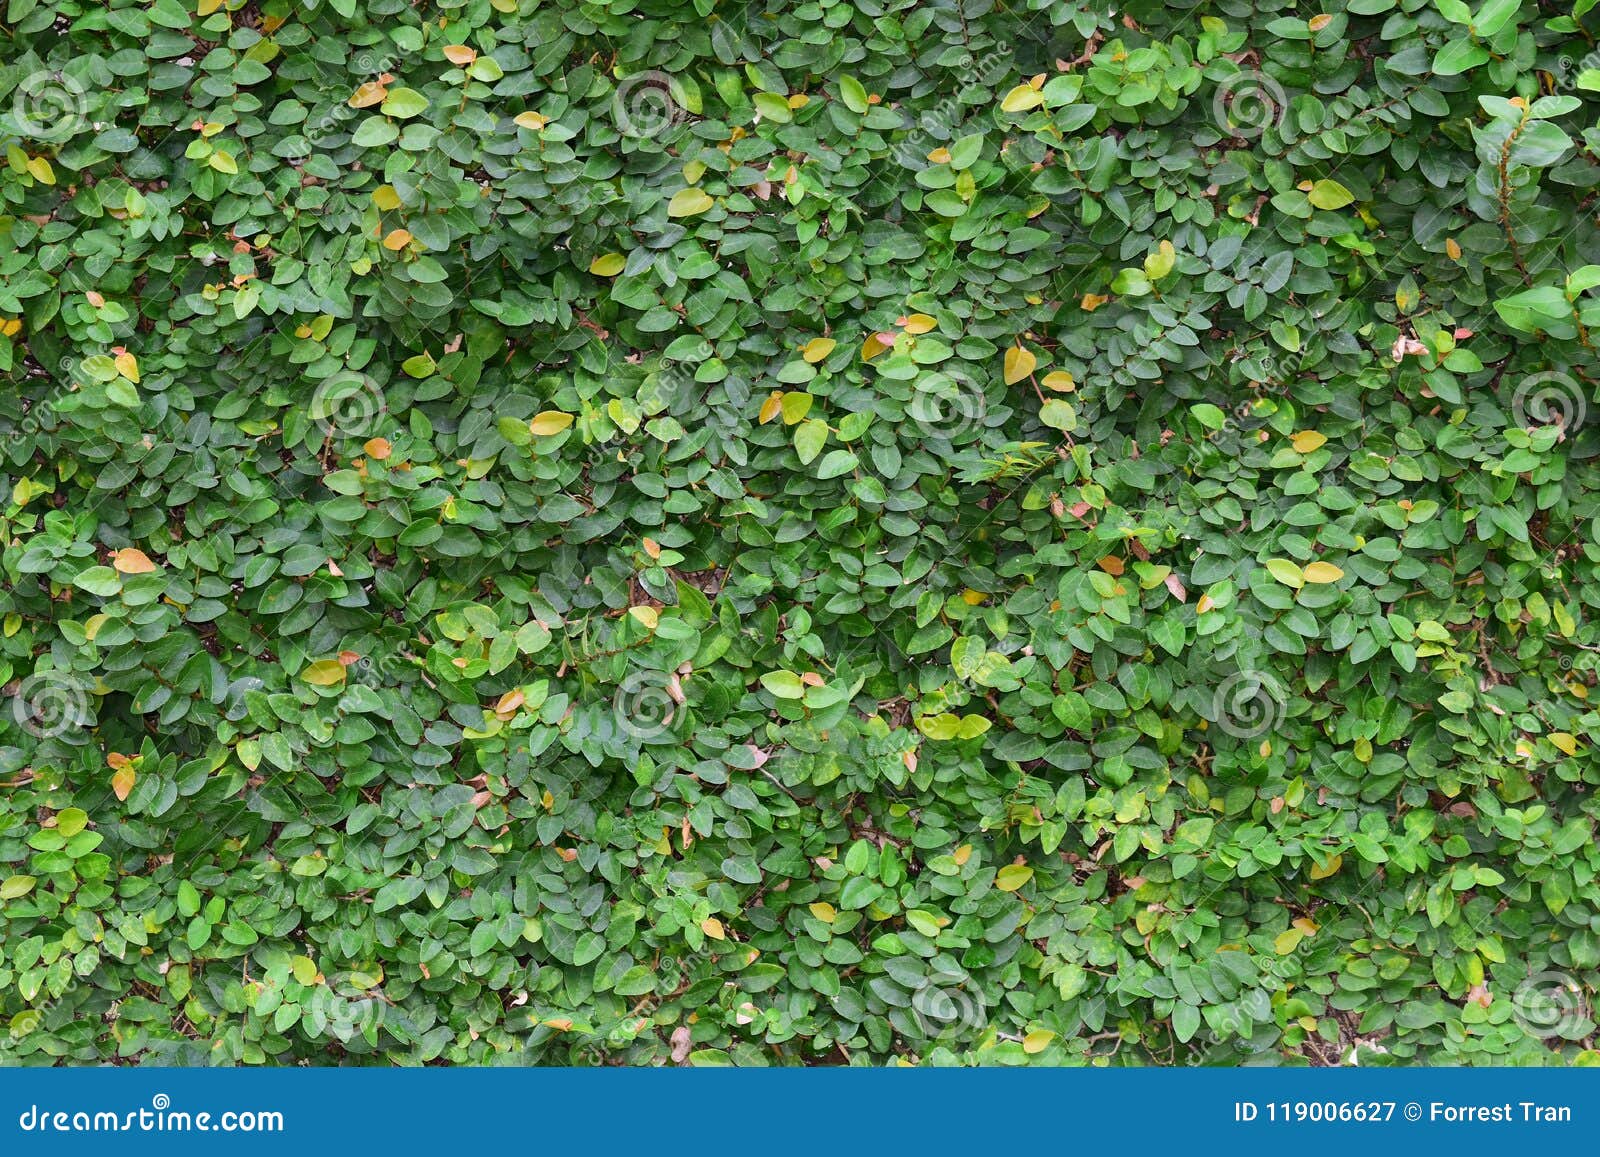 Green and Yellow Leaves Carpet Stock Image - Image of greenleaves